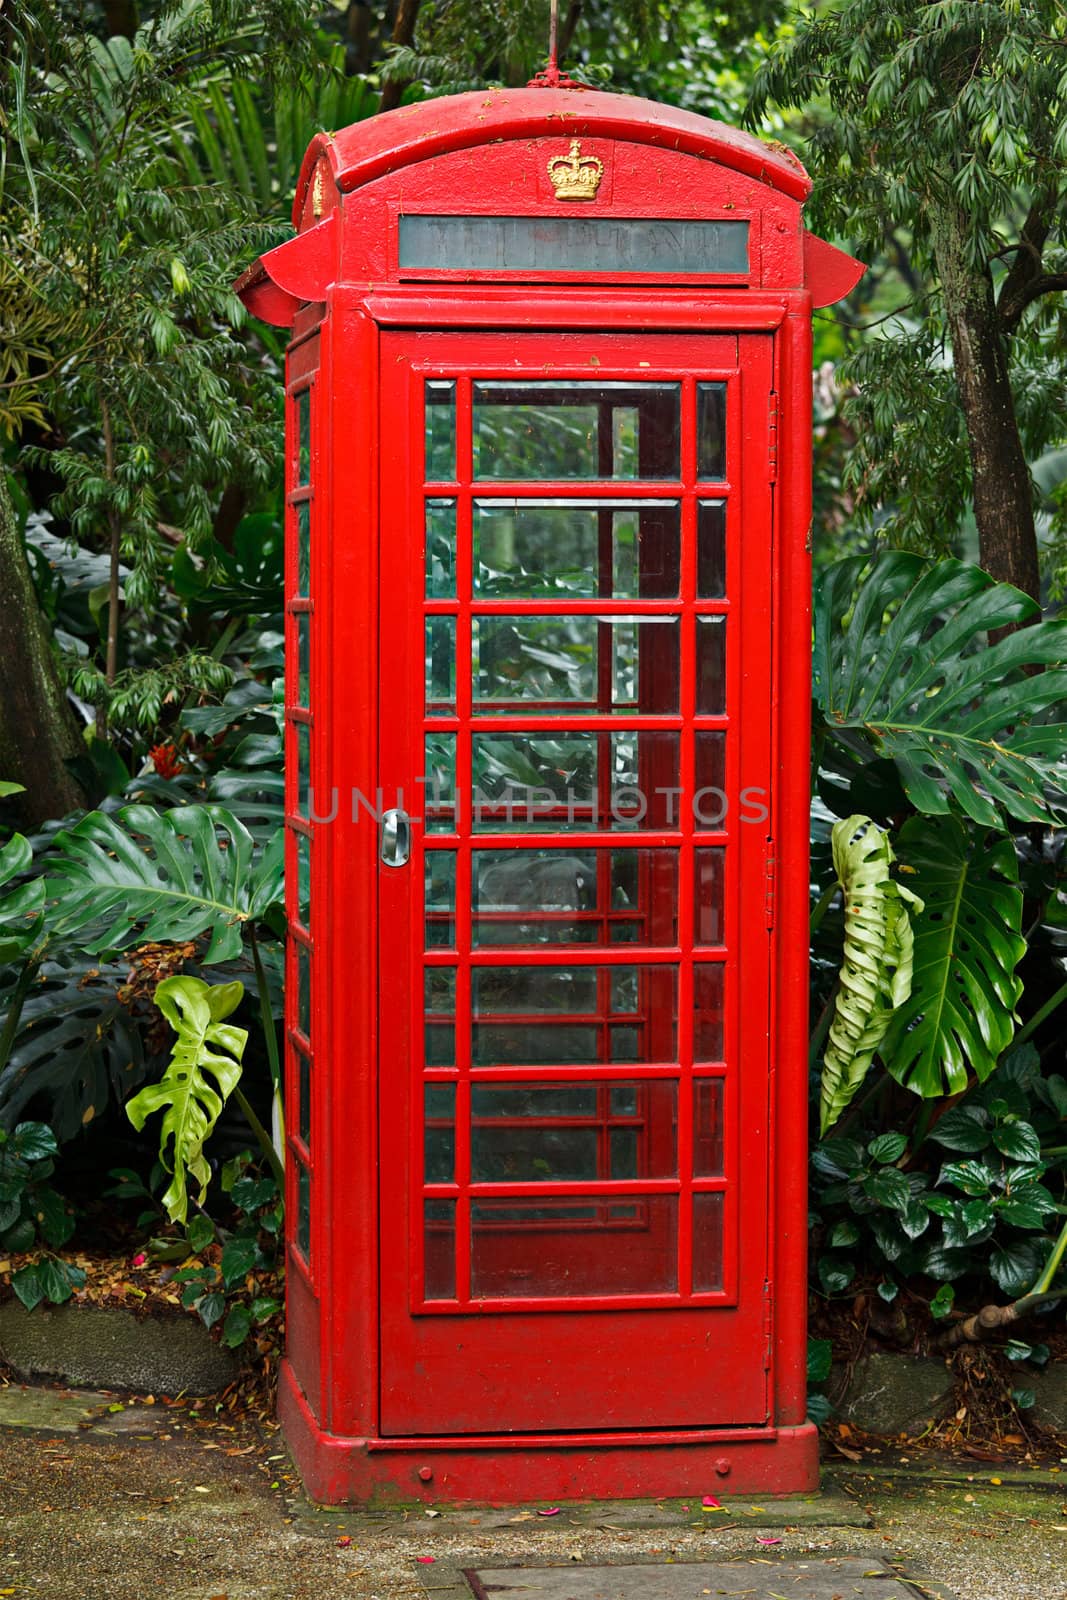 Red English telephone booth by dimol